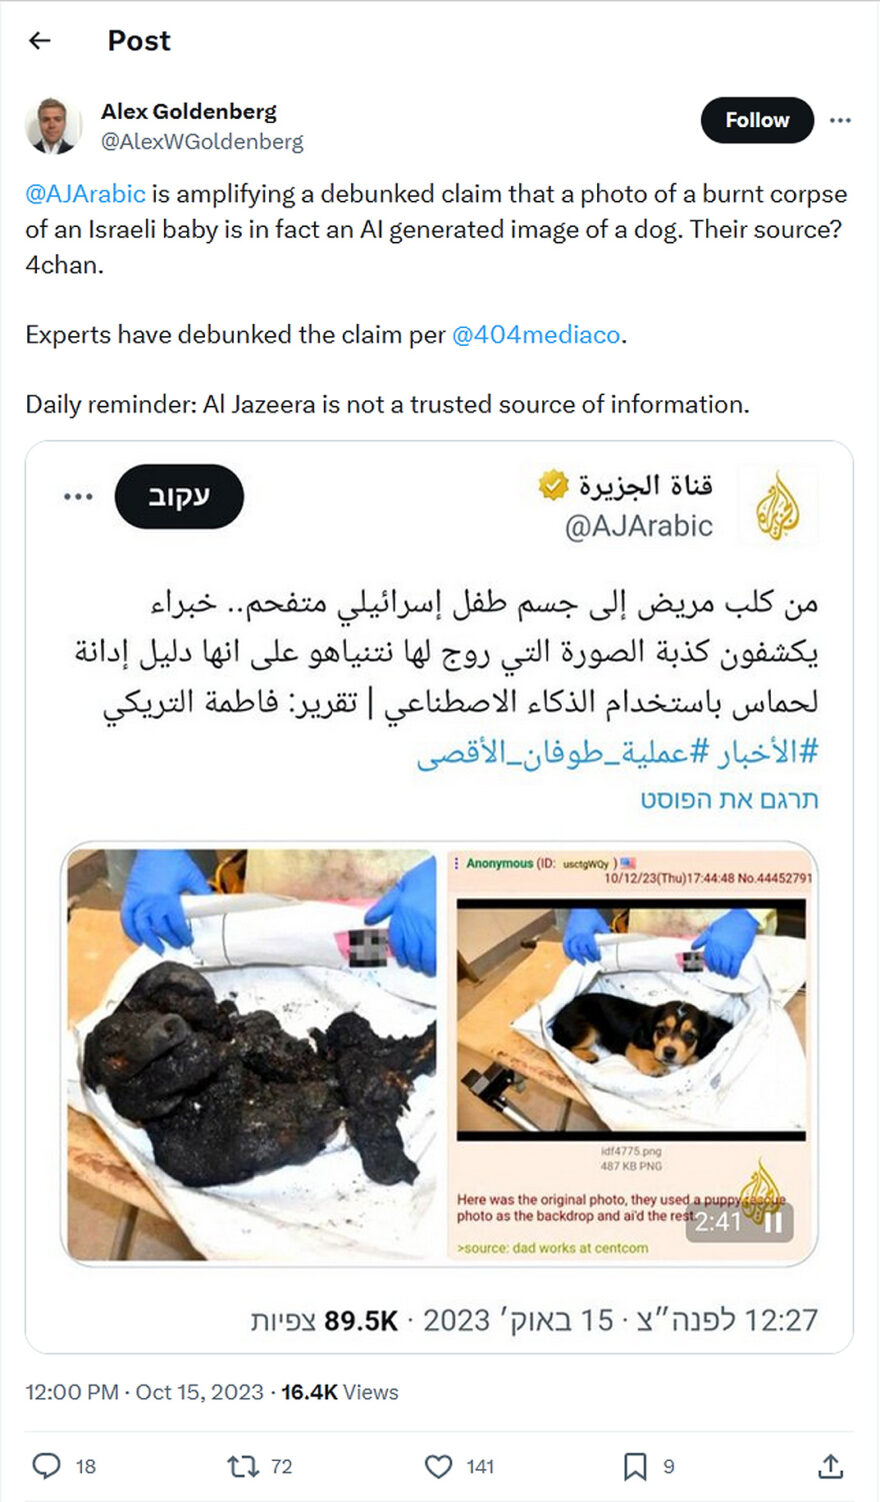 Alex Goldenberg-tweet-15October2023-@AJArabic is amplifying a debunked claim that a photo of a burnt corpse of an Israeli baby is in fact an AI generated image of a dog. Their source? 4chan.